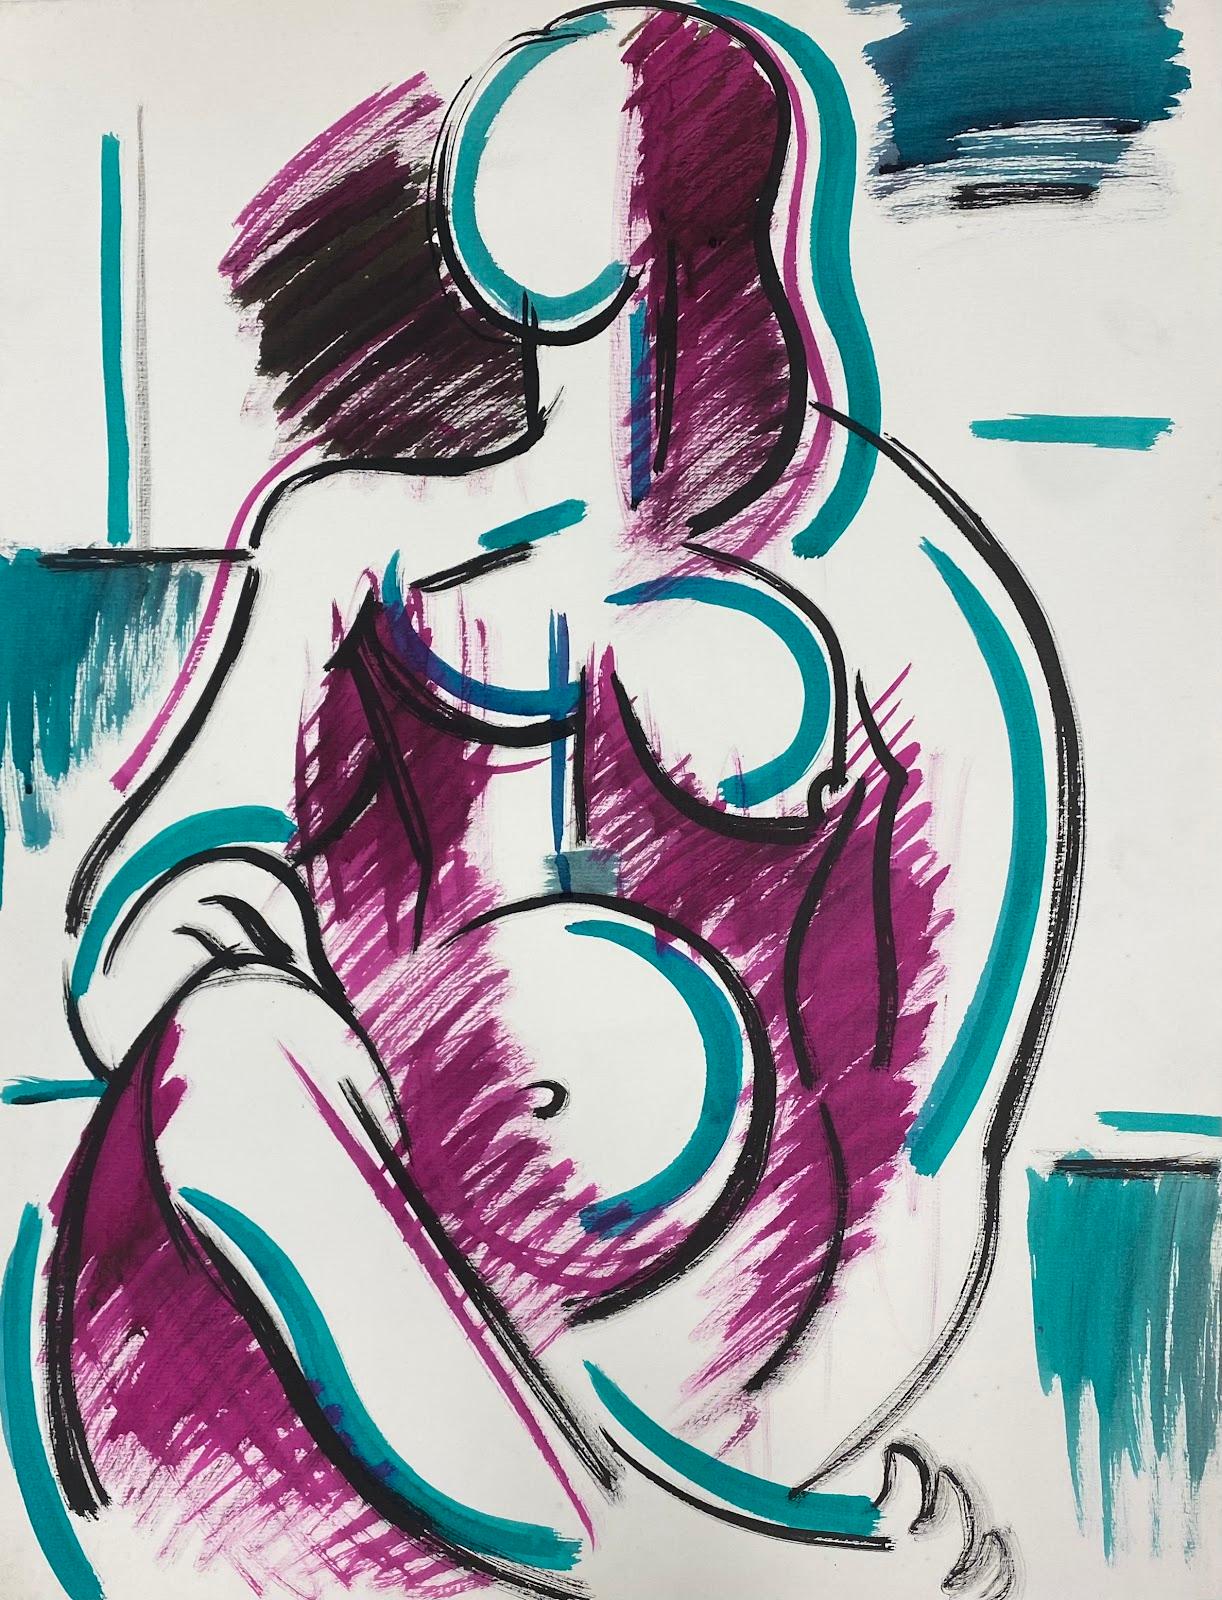 Nude
by Paul-Louis Bolot (French 1918-2003)
original gouache painting on thick paper/ card
unframed
condition: very good and sound; the edges have a few curls and scuffs/ edge tears which should all cover once flattened or framed. 
provenance: all